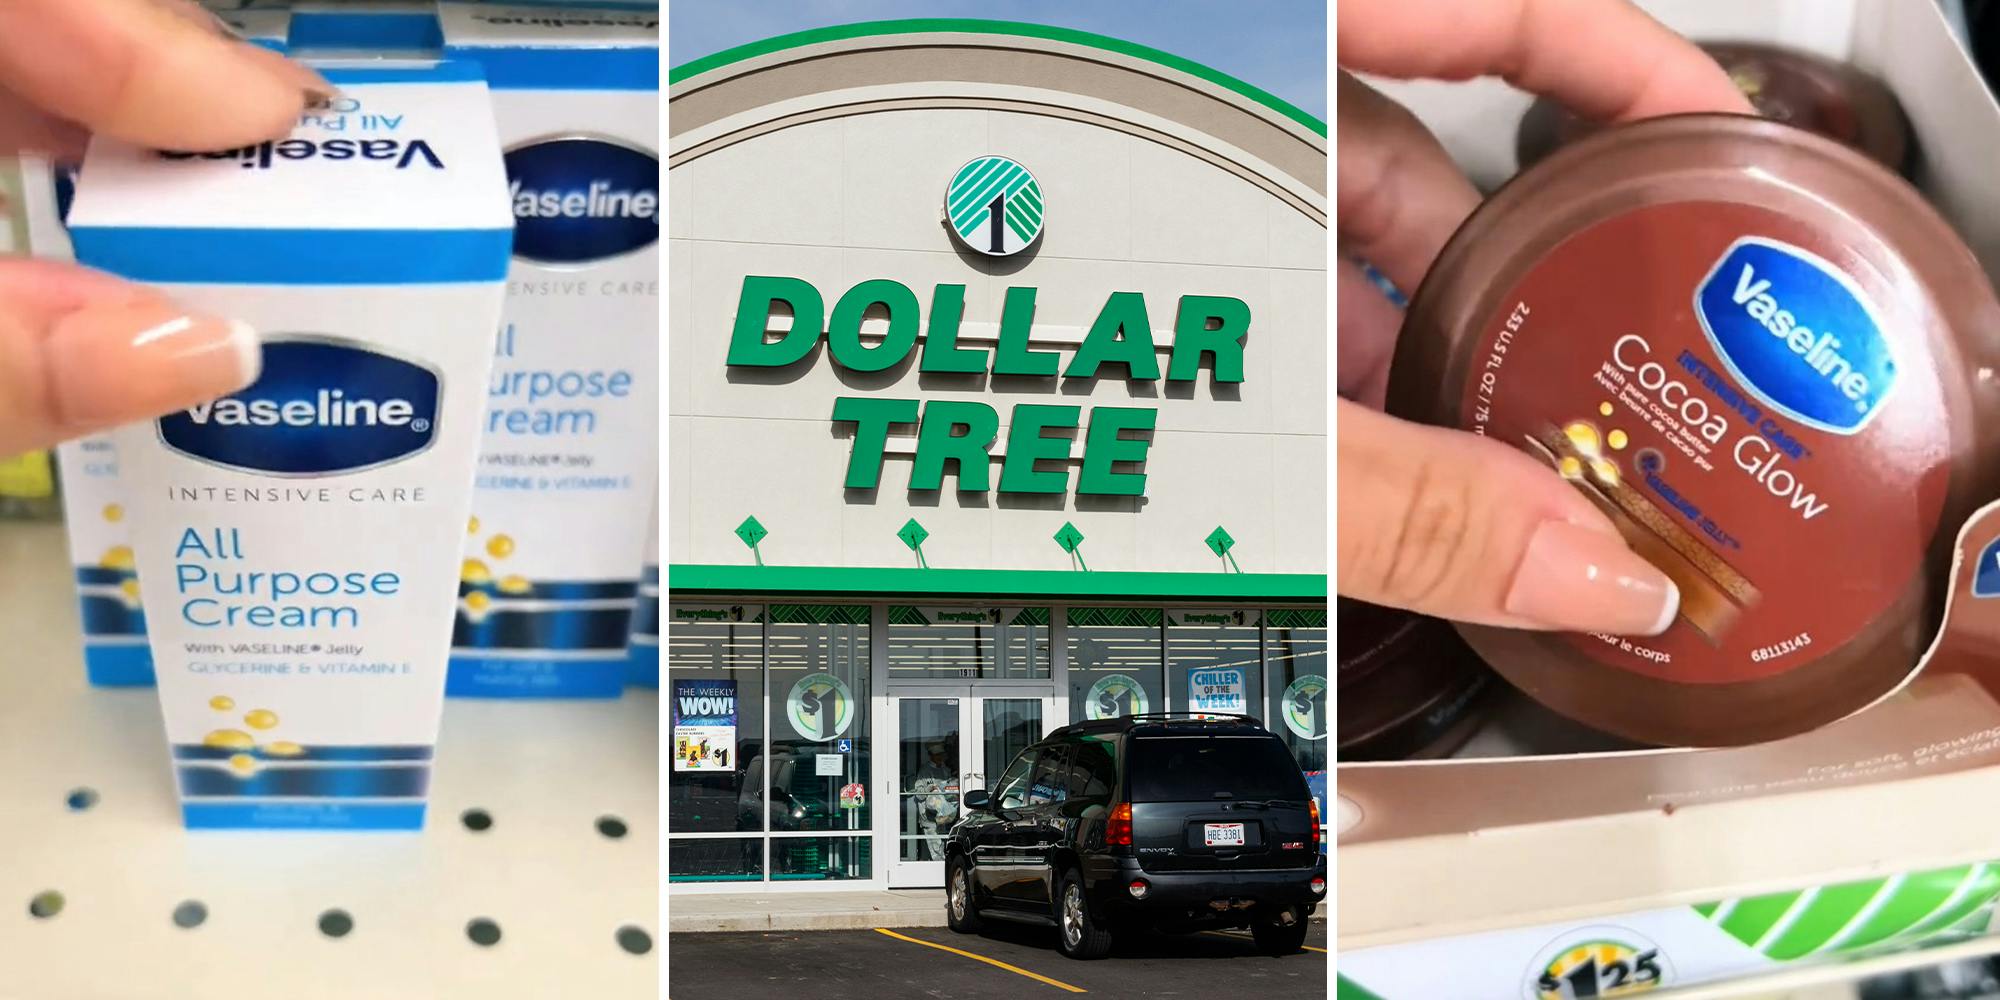 ‘I used the Target app to compare prices’: Dollar Tree shopper finds e.l.f., AirWick, Vaseline products for $1.25